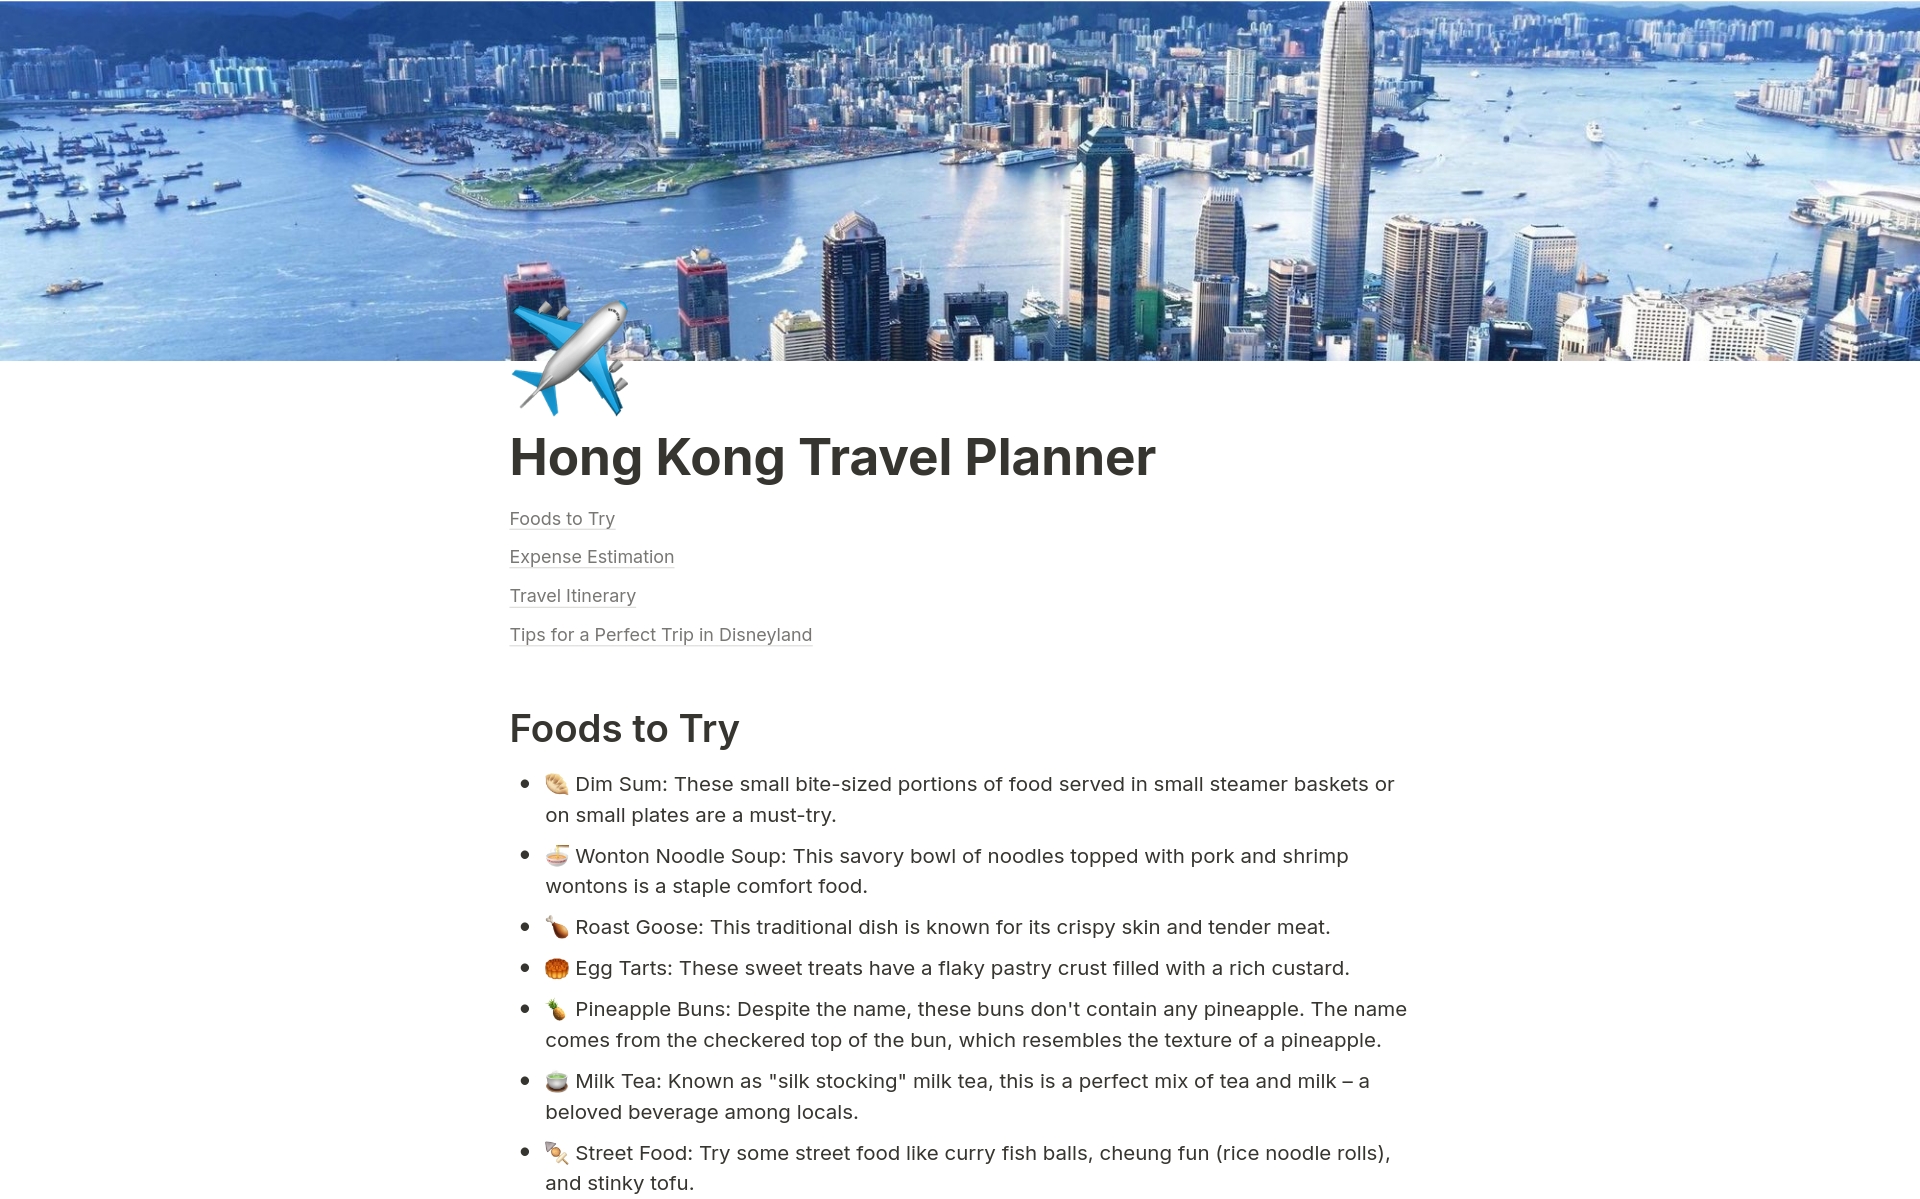 Explore Hong Kong hassle-free with our Travel Planner! From delicious foods to try and budget estimation tools, to customizable itineraries and must-visit Disneyland tips – you'll get it all! Start planning your unforgettable journey today.